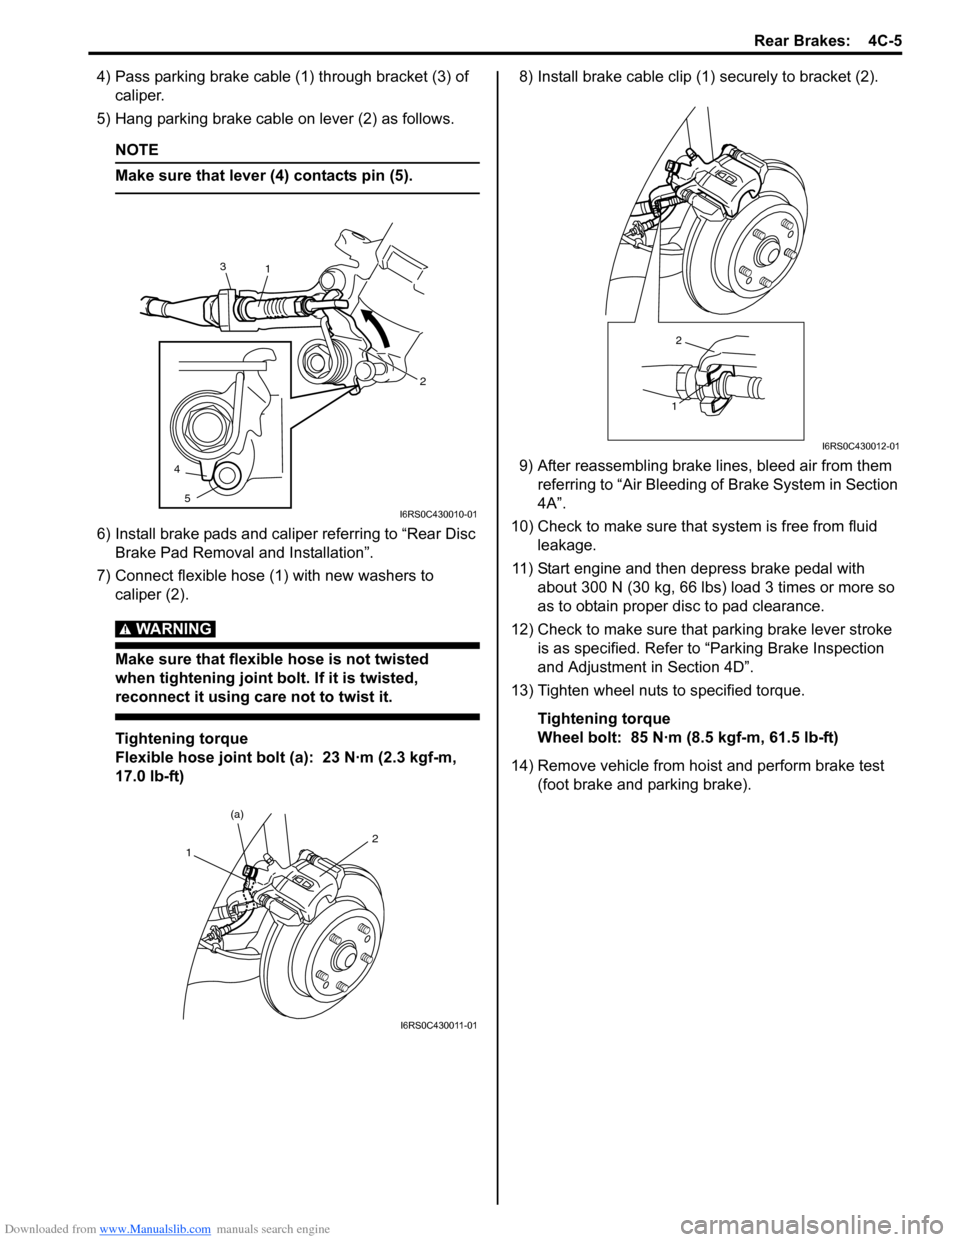 SUZUKI SWIFT 2005 2.G Service Workshop Manual Downloaded from www.Manualslib.com manuals search engine Rear Brakes:  4C-5
4) Pass parking brake cable (1) through bracket (3) of caliper.
5) Hang parking brake cable on lever (2) as follows.
NOTE
Ma